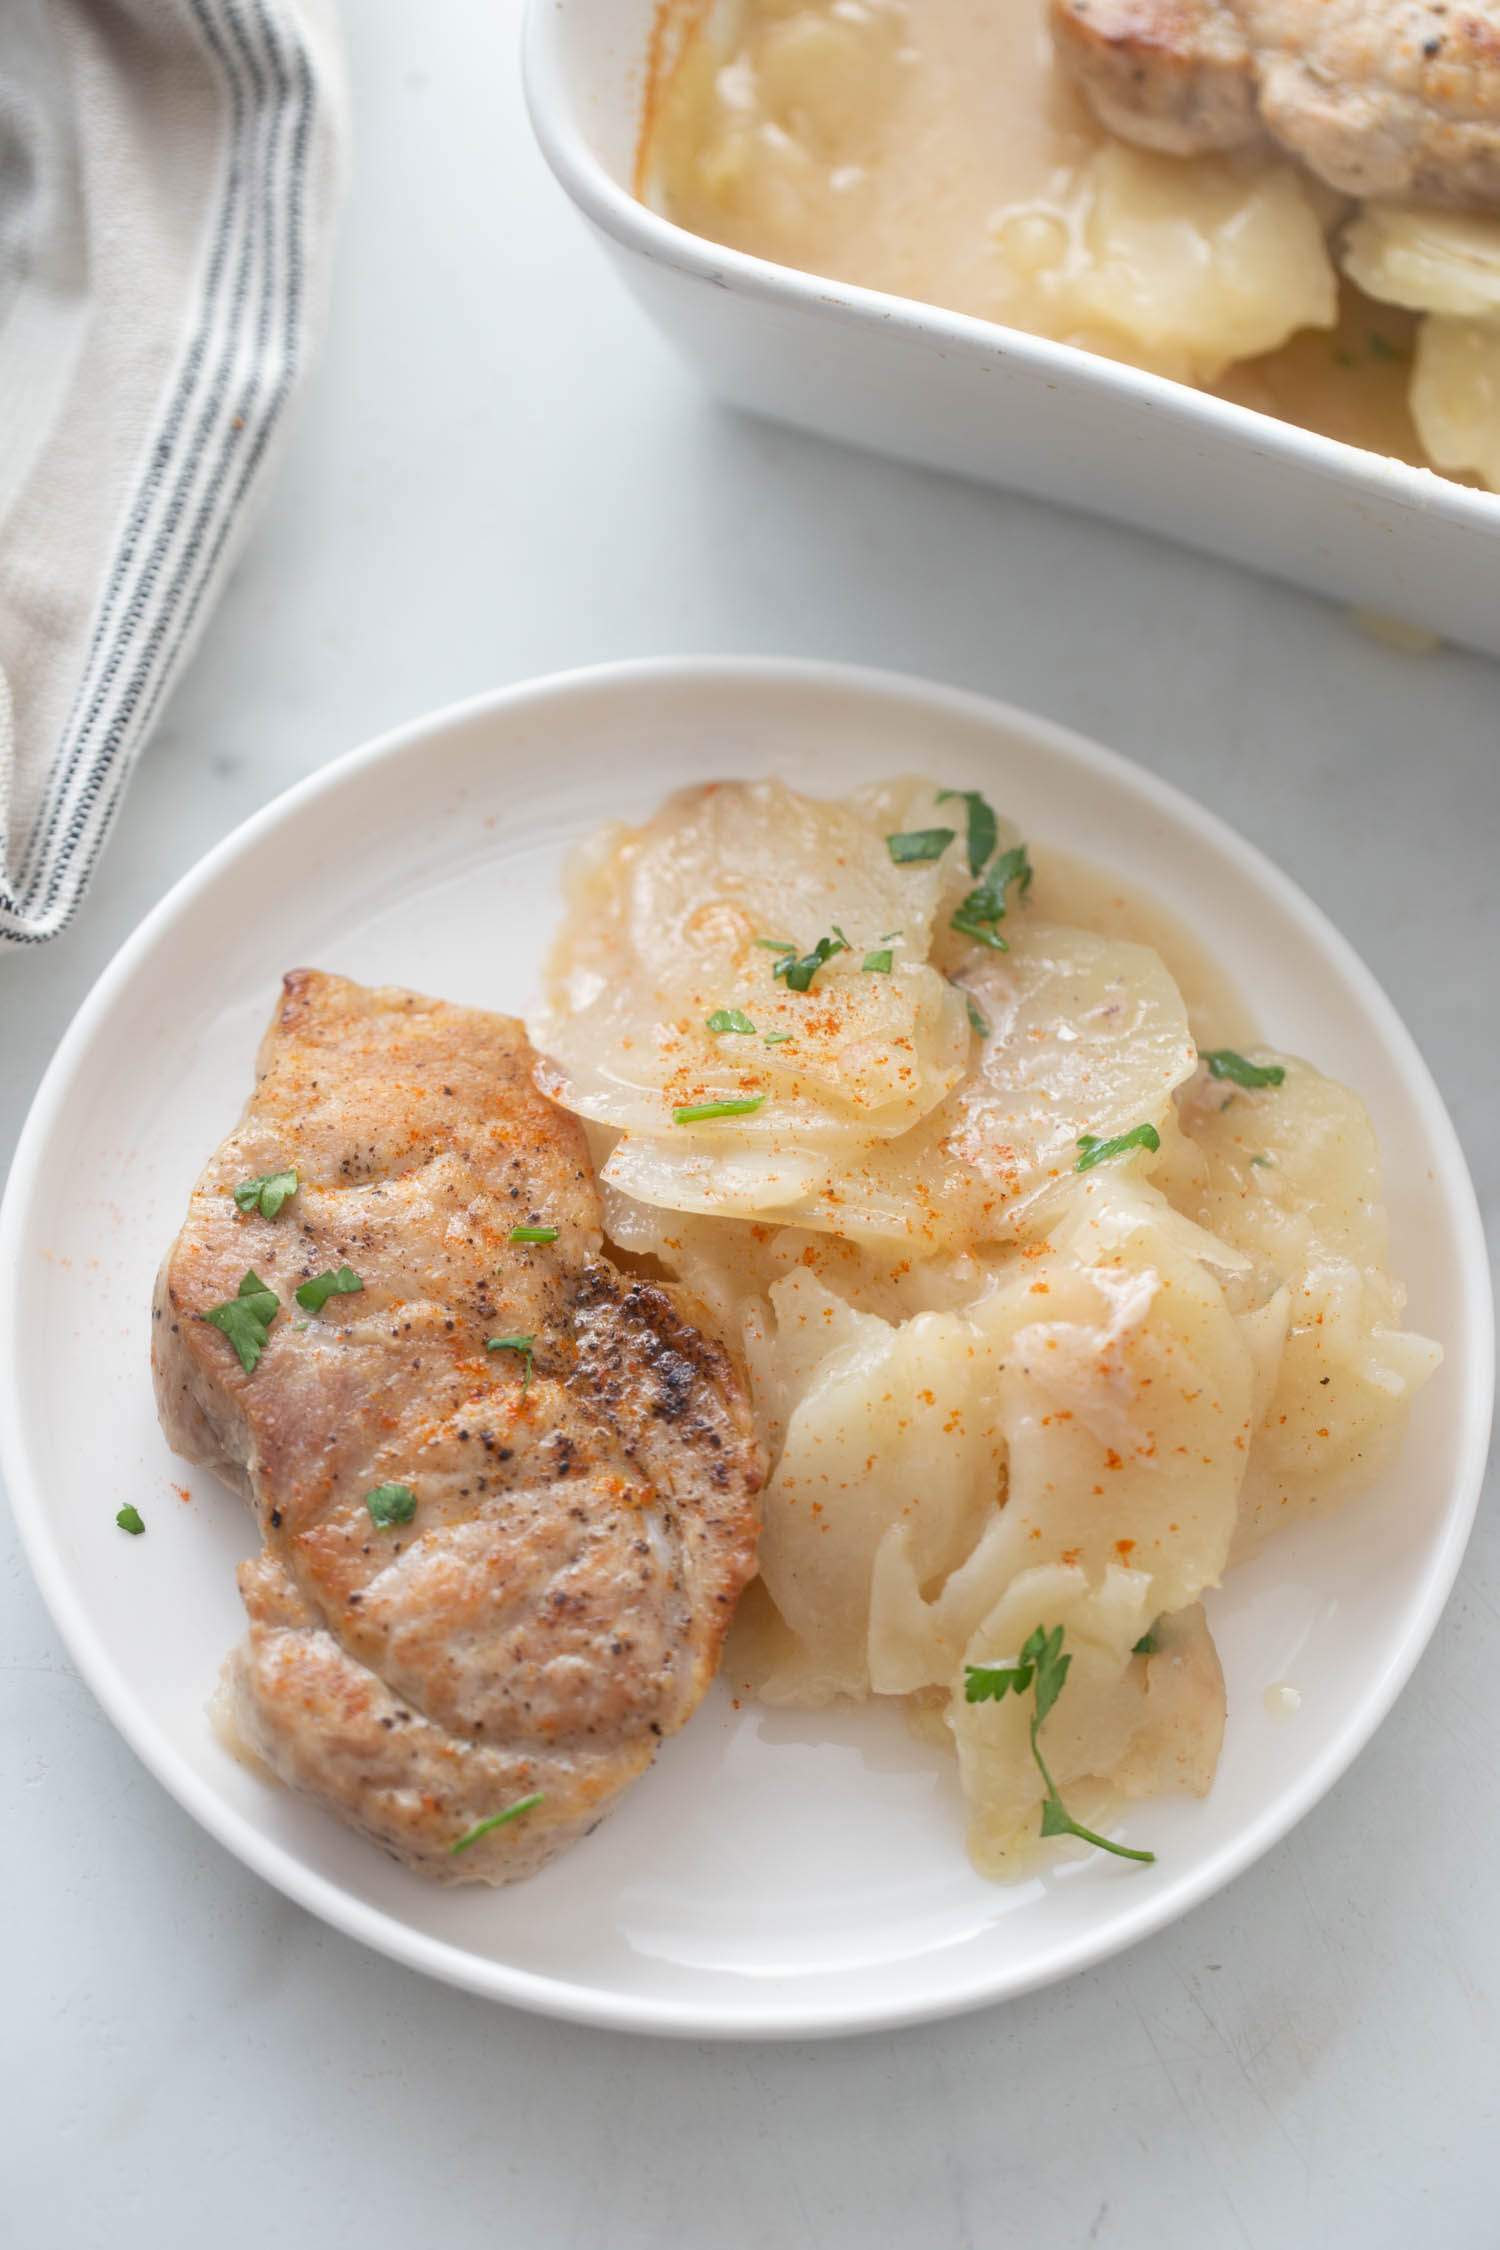 Pork Chops and Scalloped Potatoes Casserole on a plate